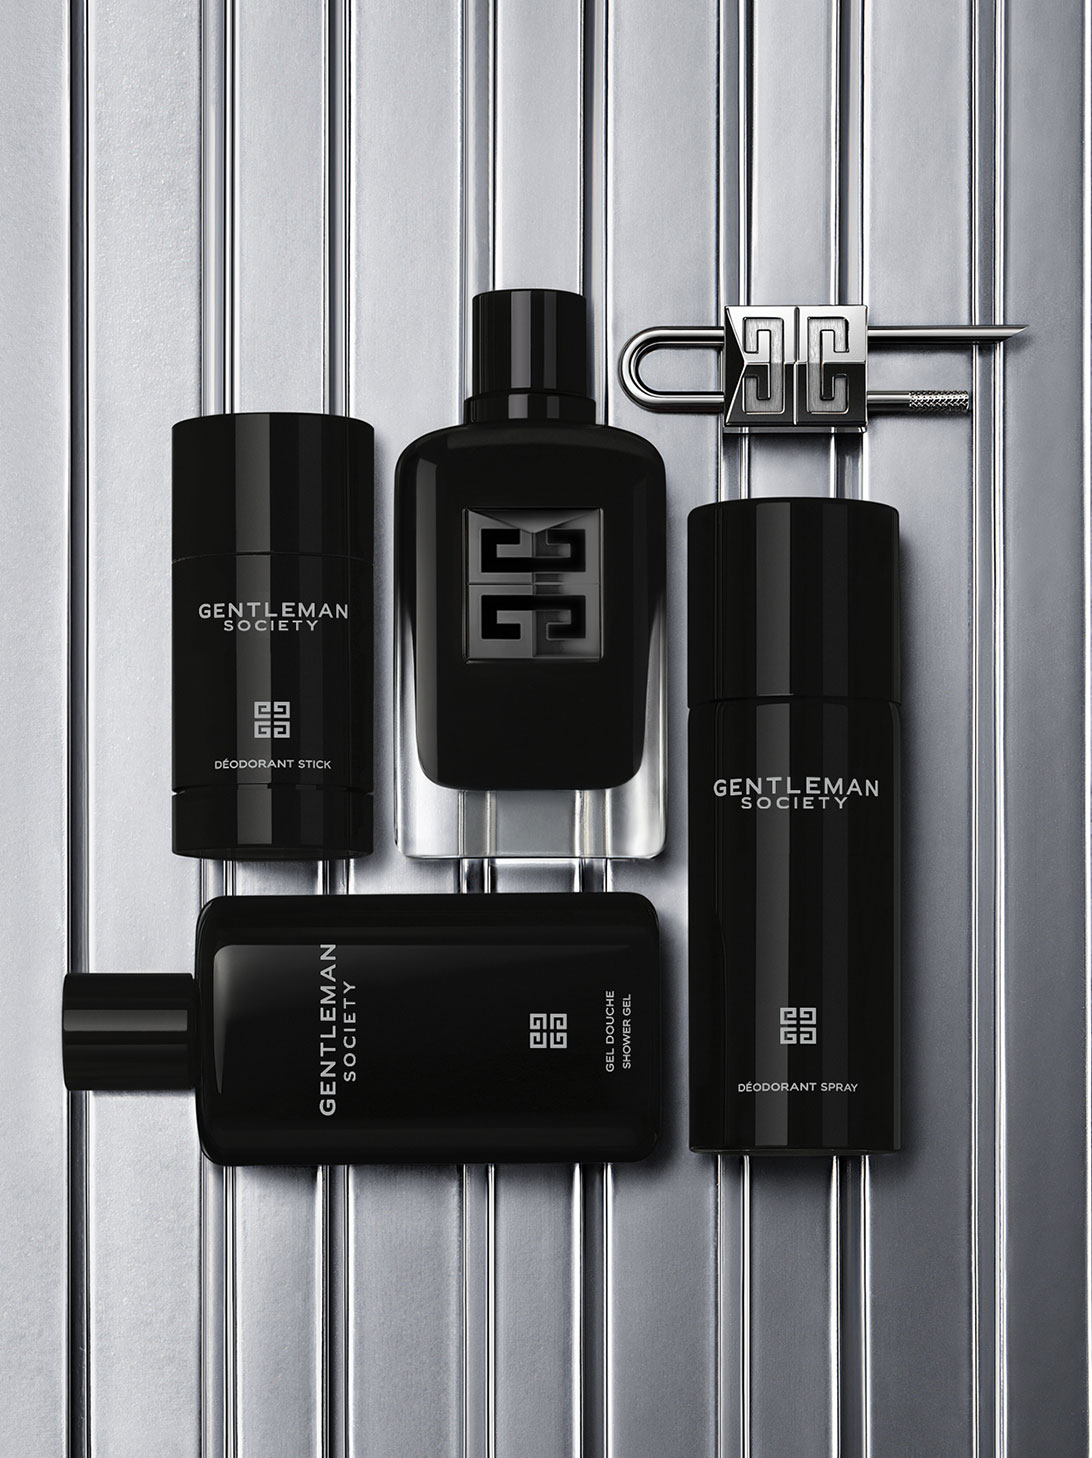 Givenchy gentleman society extreme